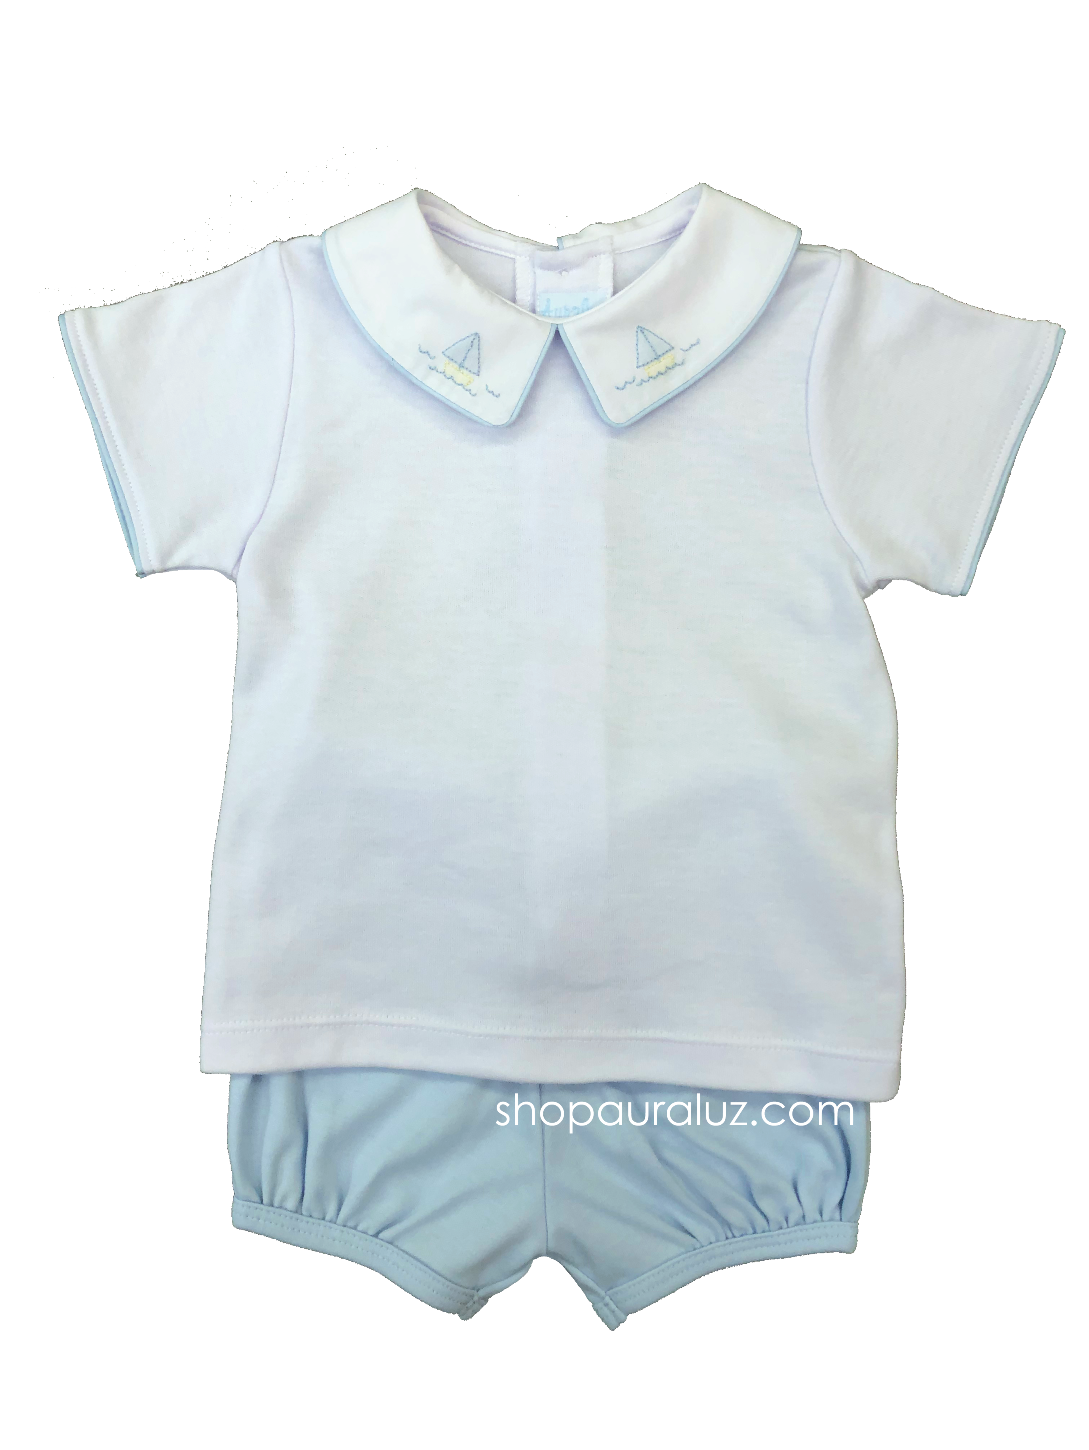 Auraluz Boy 2pc Knit Set..Blue/White with embroidered boats